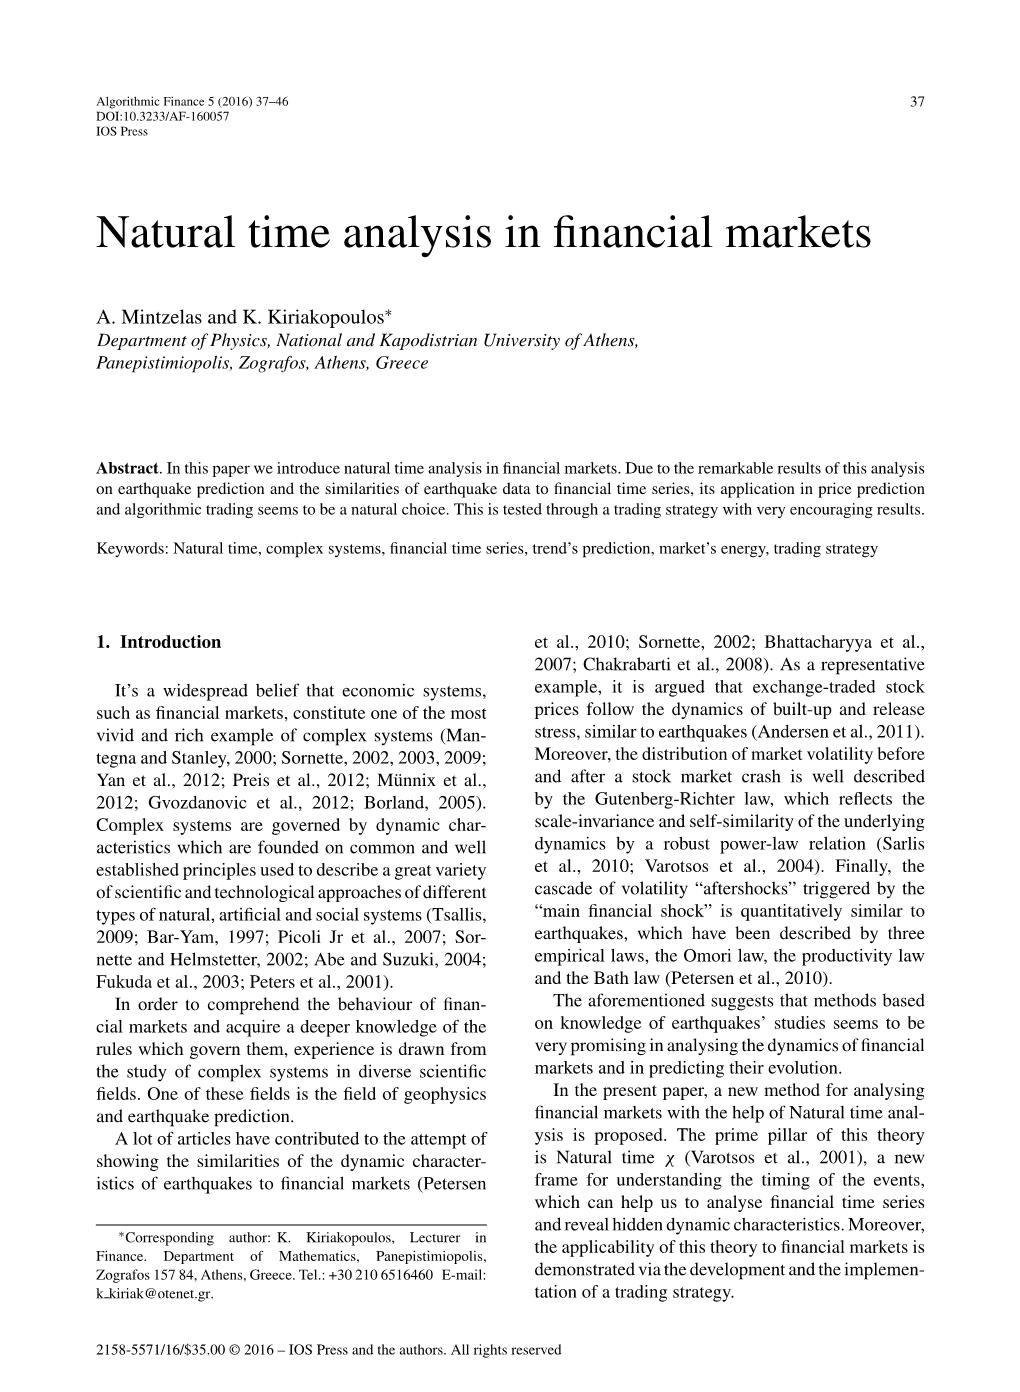 Natural Time Analysis in Financial Markets